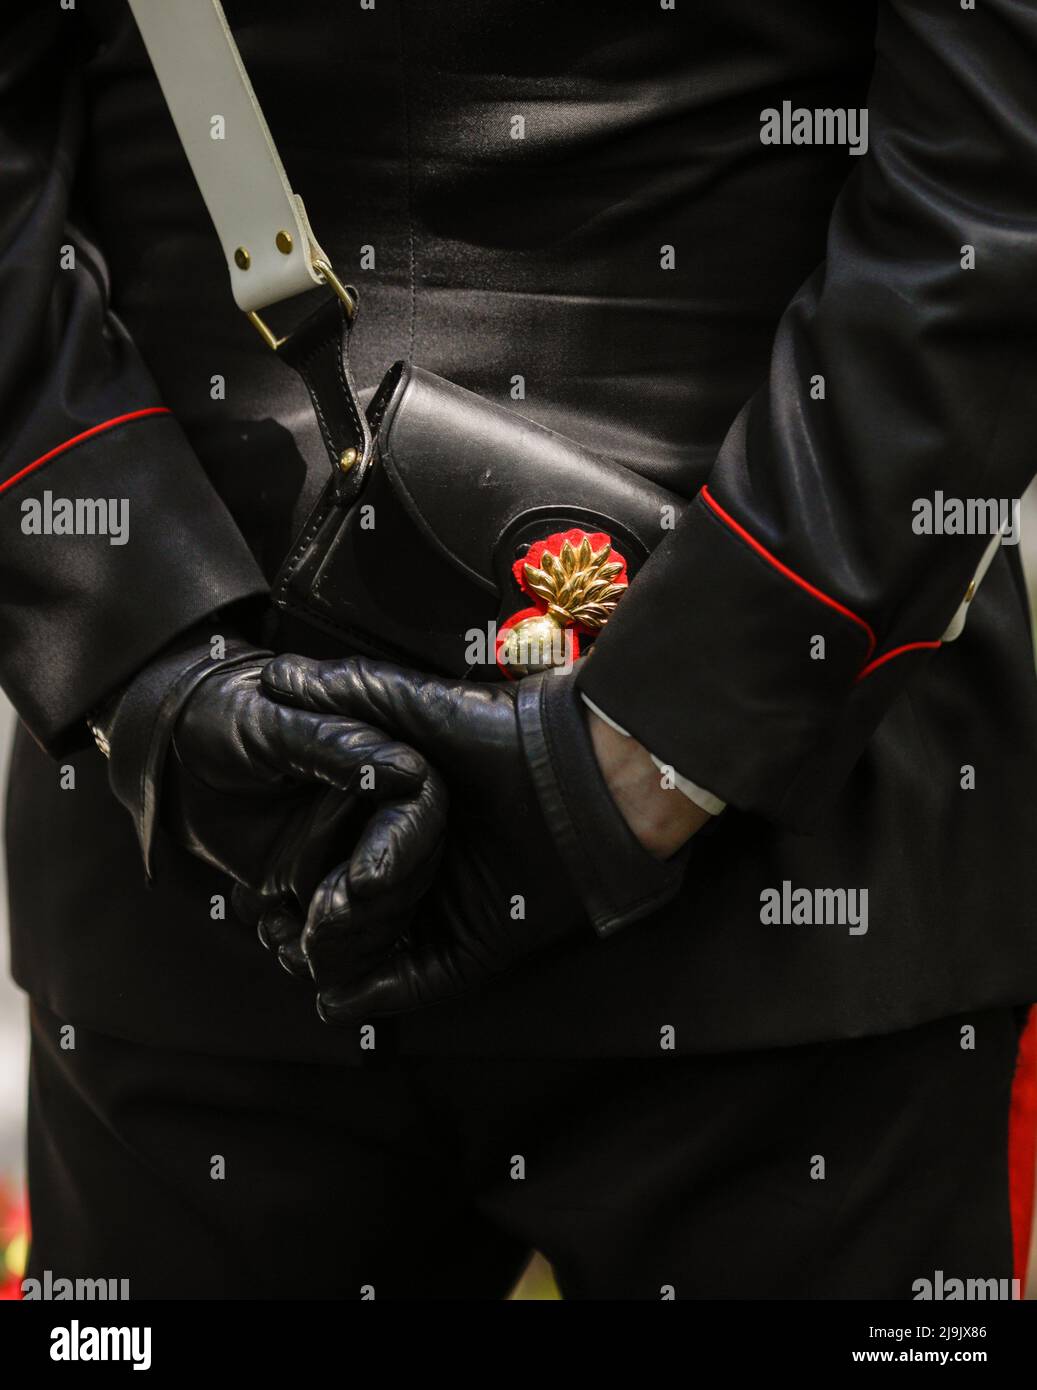 Bucharest, Romania - May 23, 2022: Details with the uniform and leather handbag, with a carabinier's cap badge, of an Italian policeman in a ceremonia Stock Photo